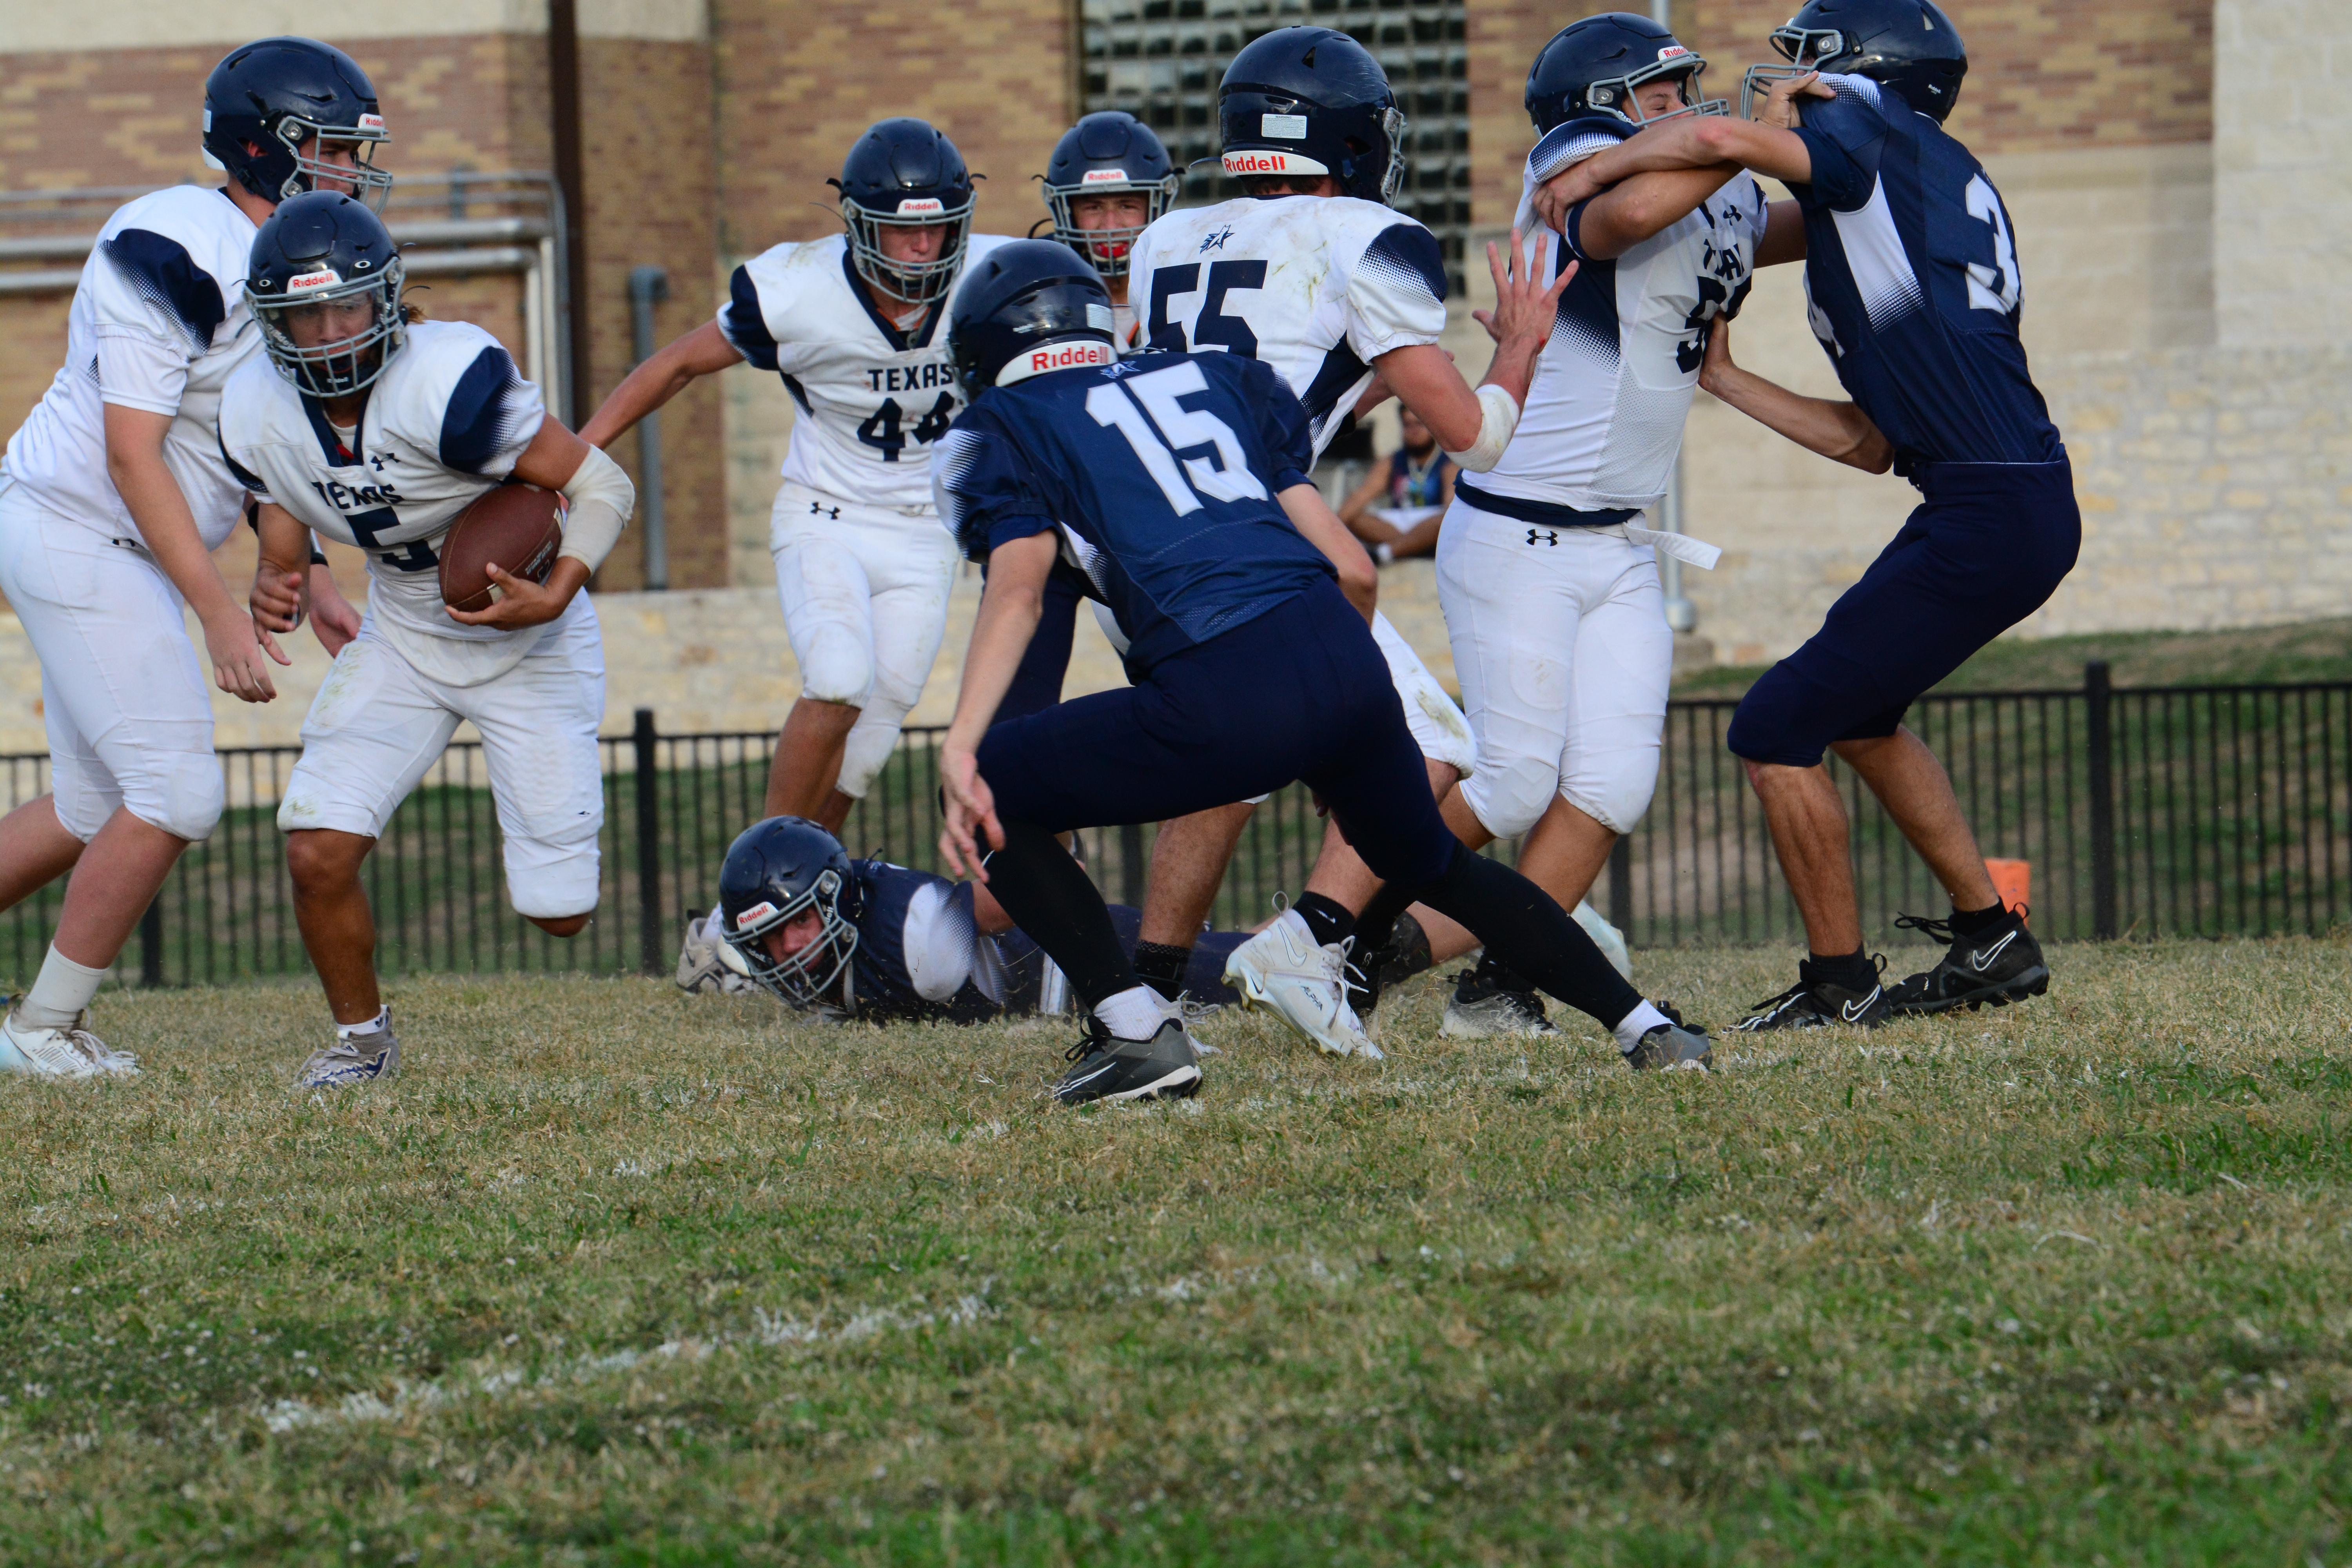  6 white uniforms football athletes on the field, three blue uniforms played defense, and the number 5 is holding the ball. On the far right, blue and white uniforms tackled each other.